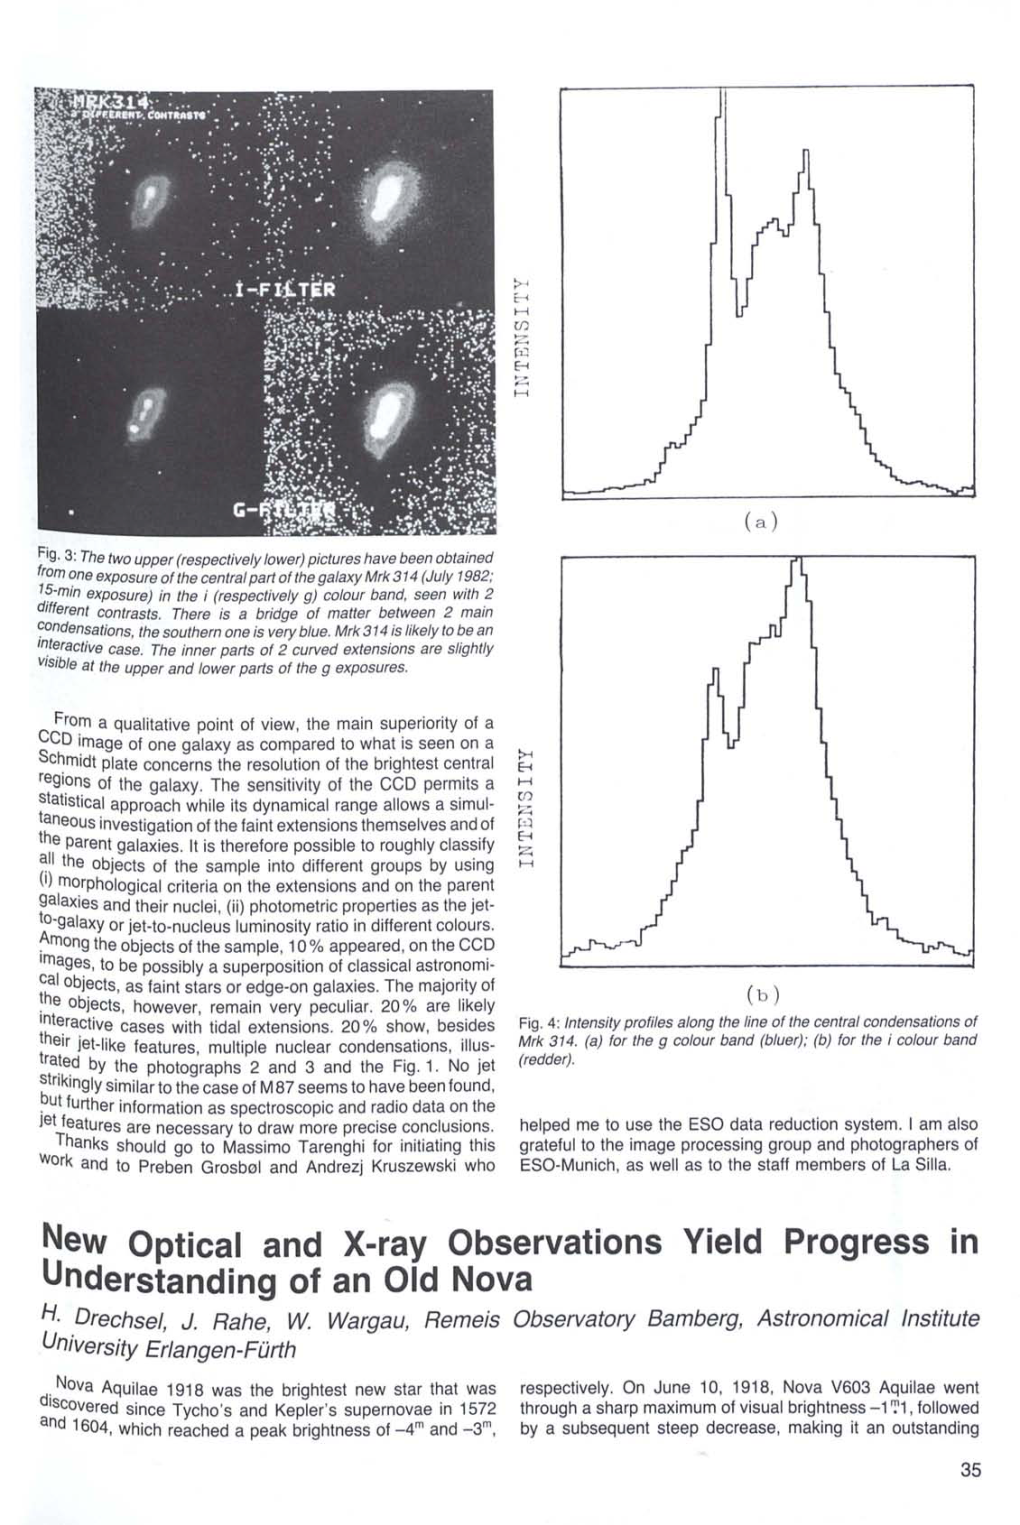 New Optical and X-Ray Observations Vield Progress in Understanding of an Old Nova H